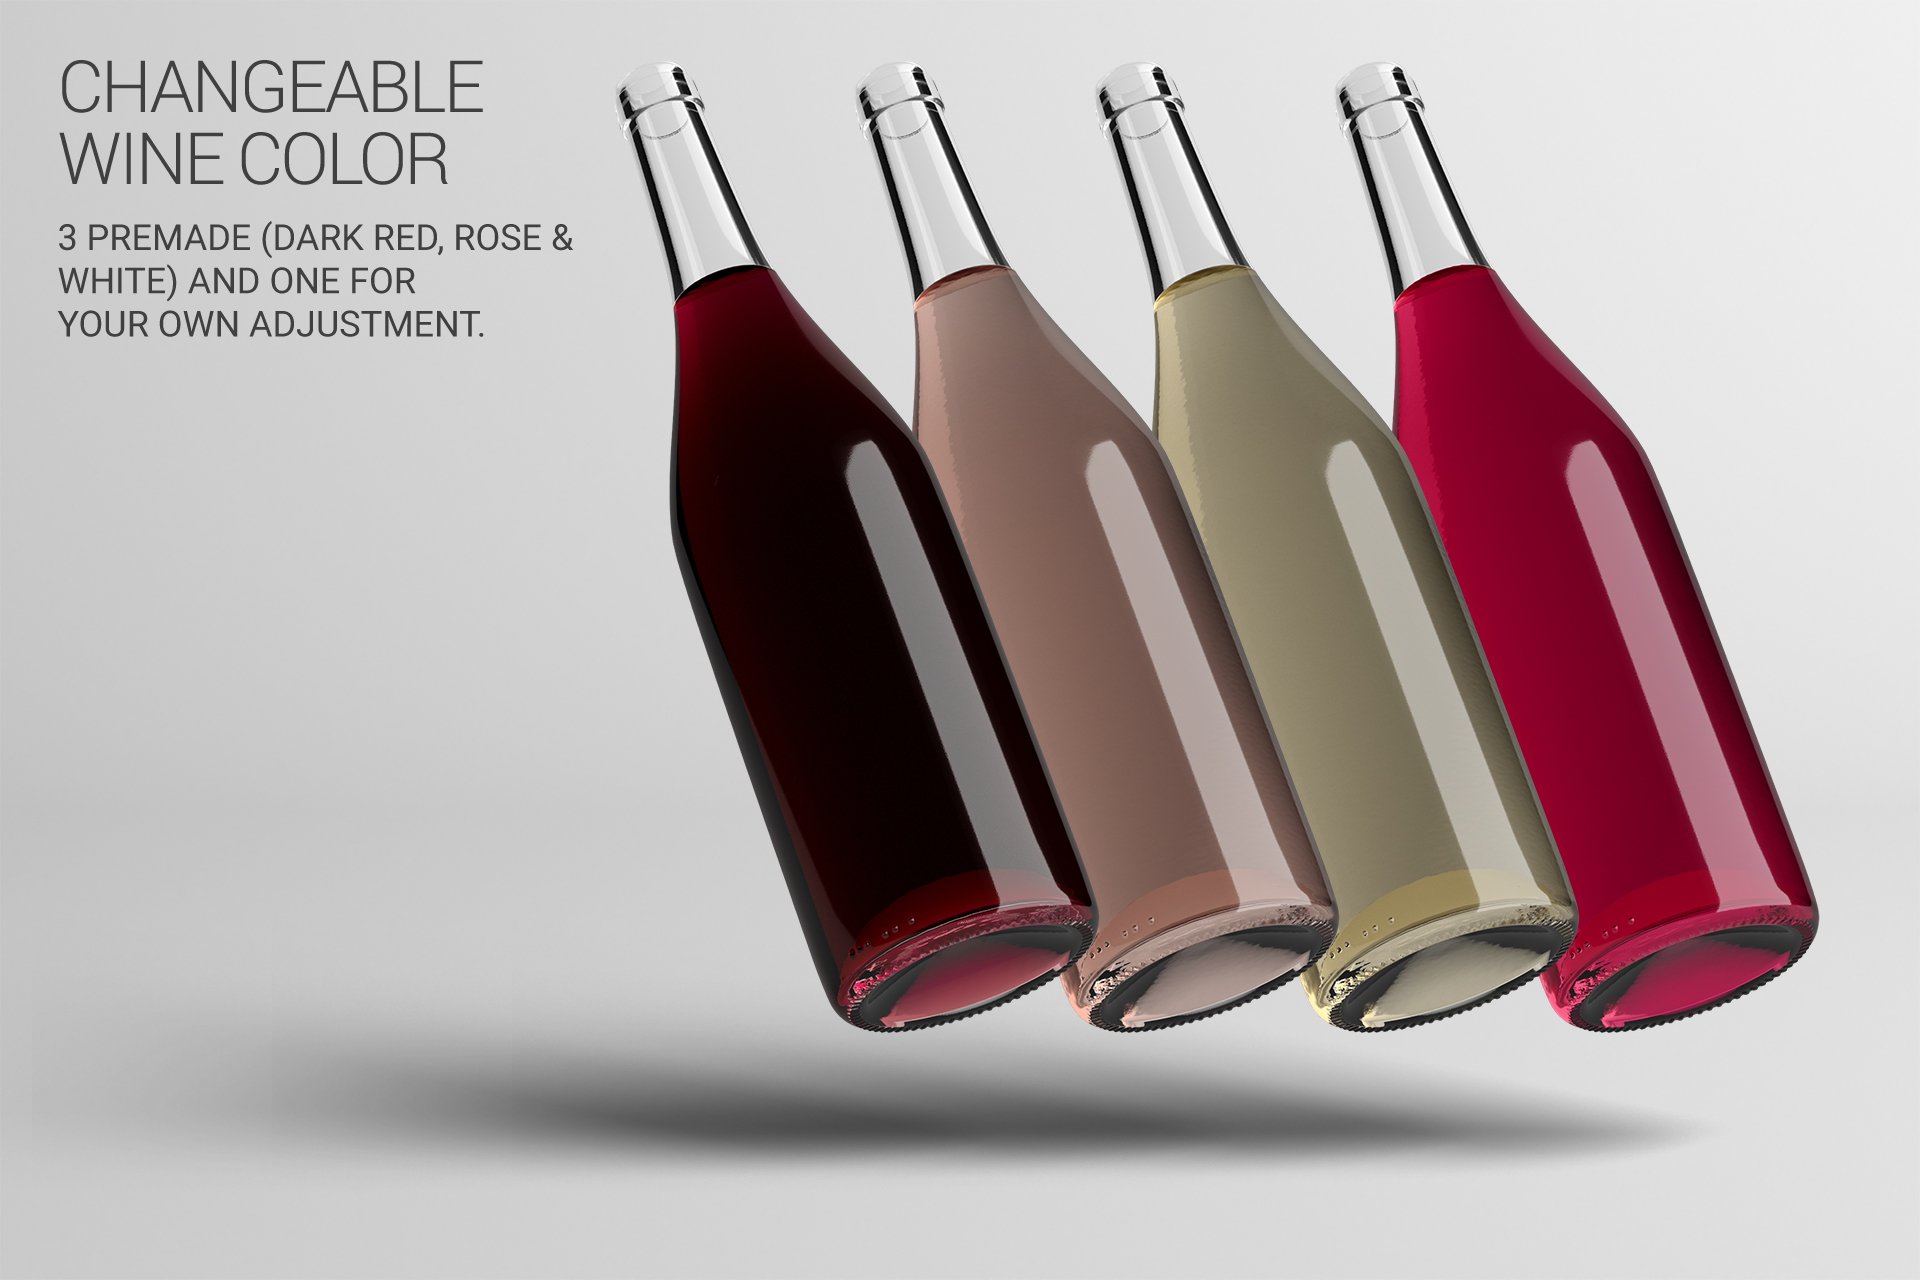 Four bottles in different colors and without labels.